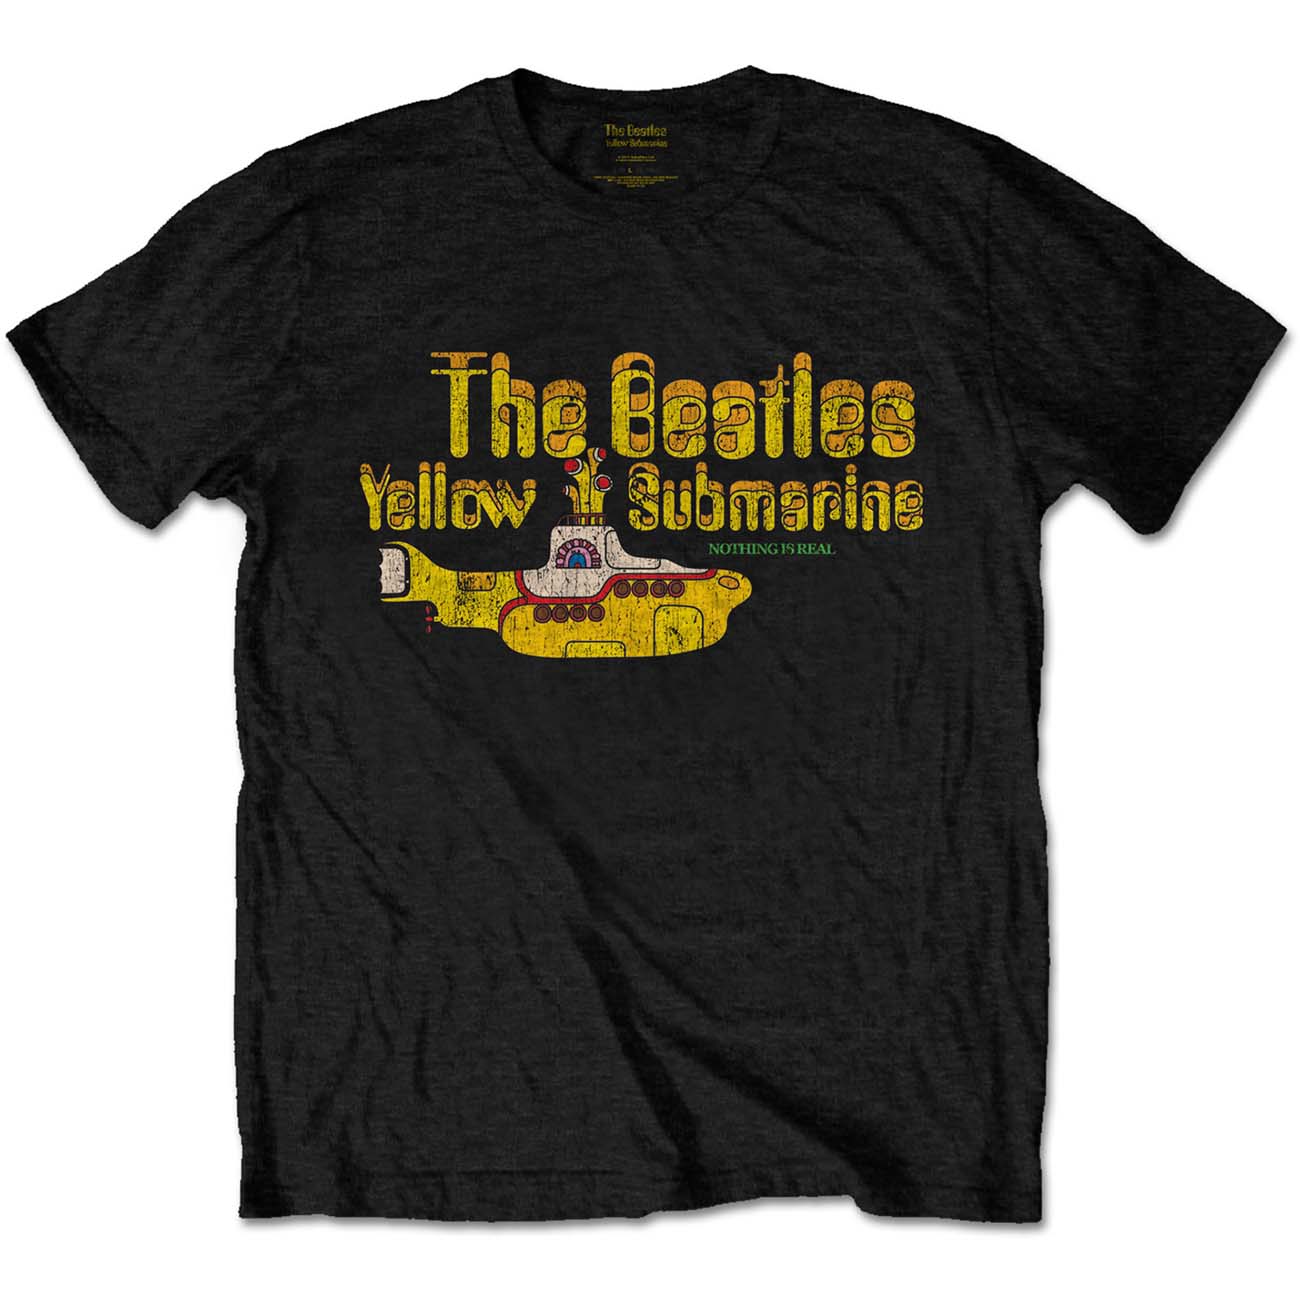 The Beatles Official T-Shirt Nothing is Real